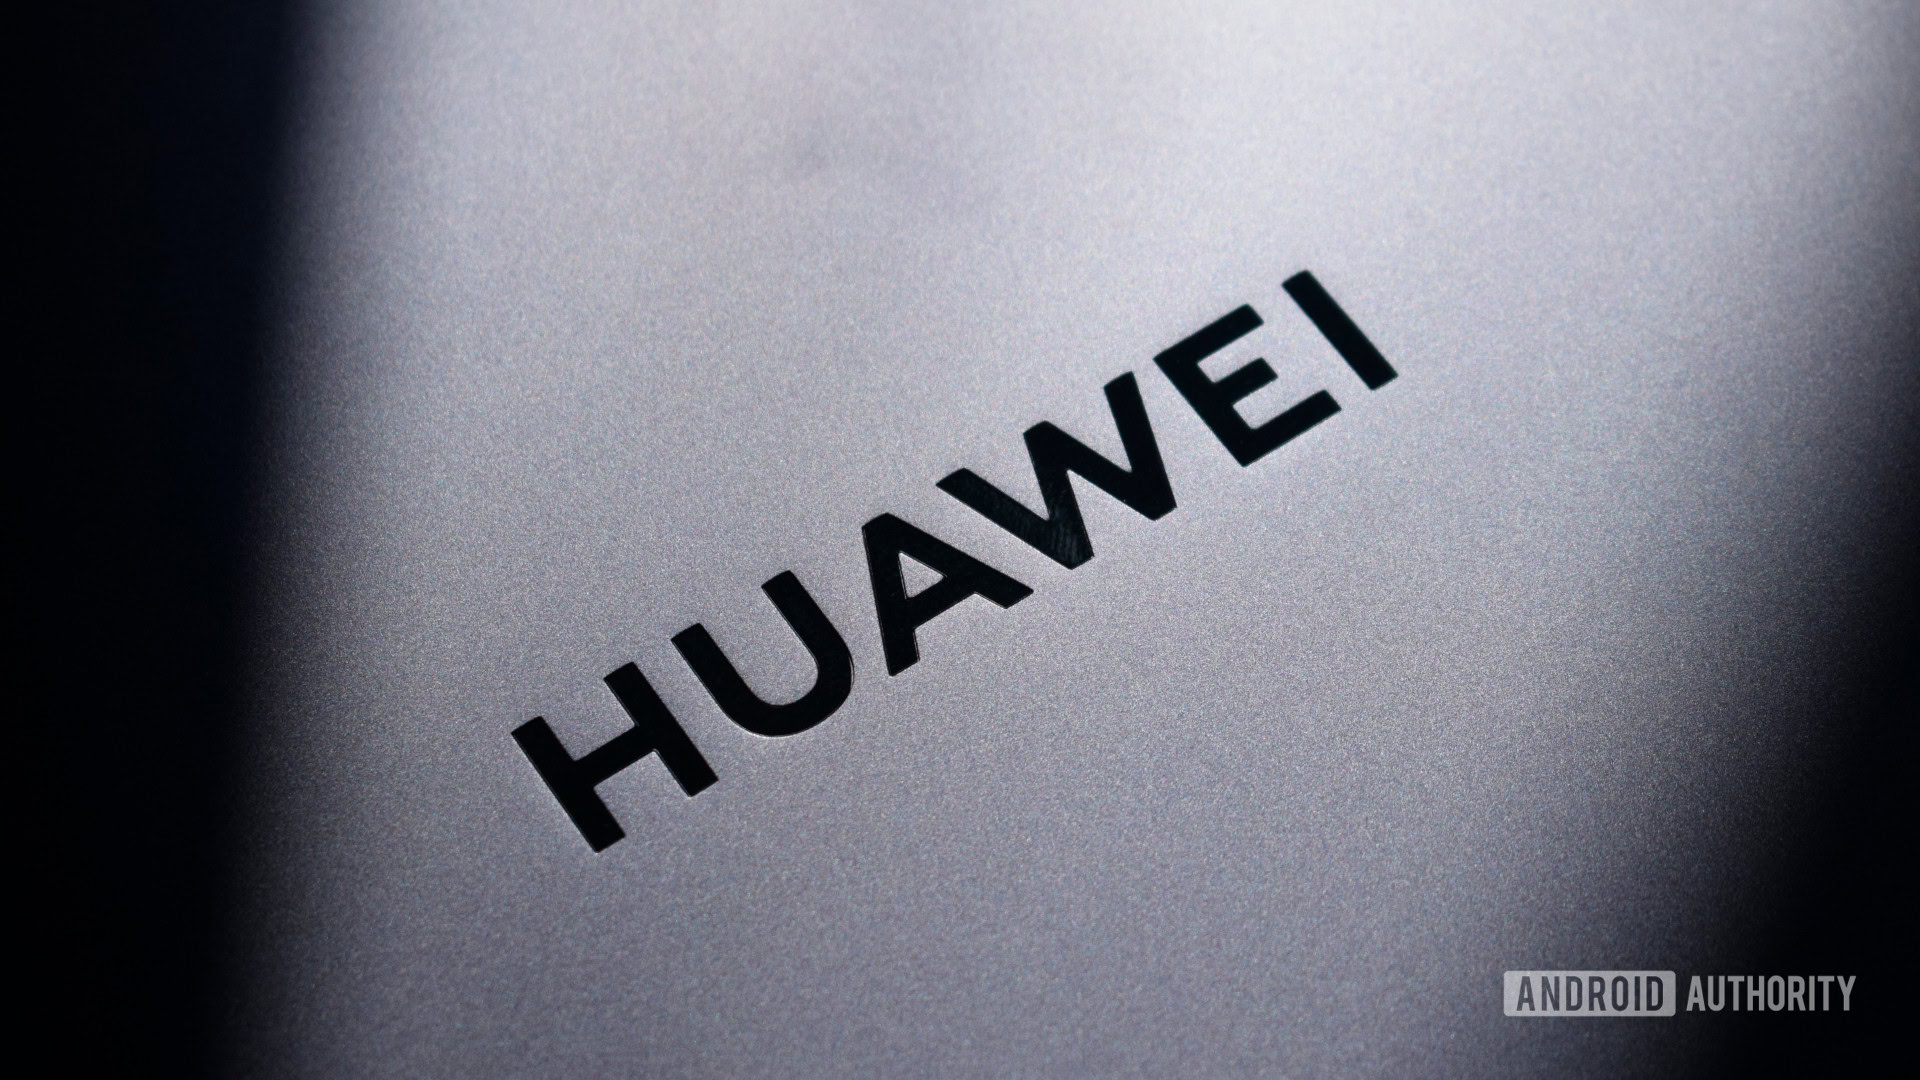 Phones shipping with Android 13 will require a technology created by...Huawei? - Android Authority